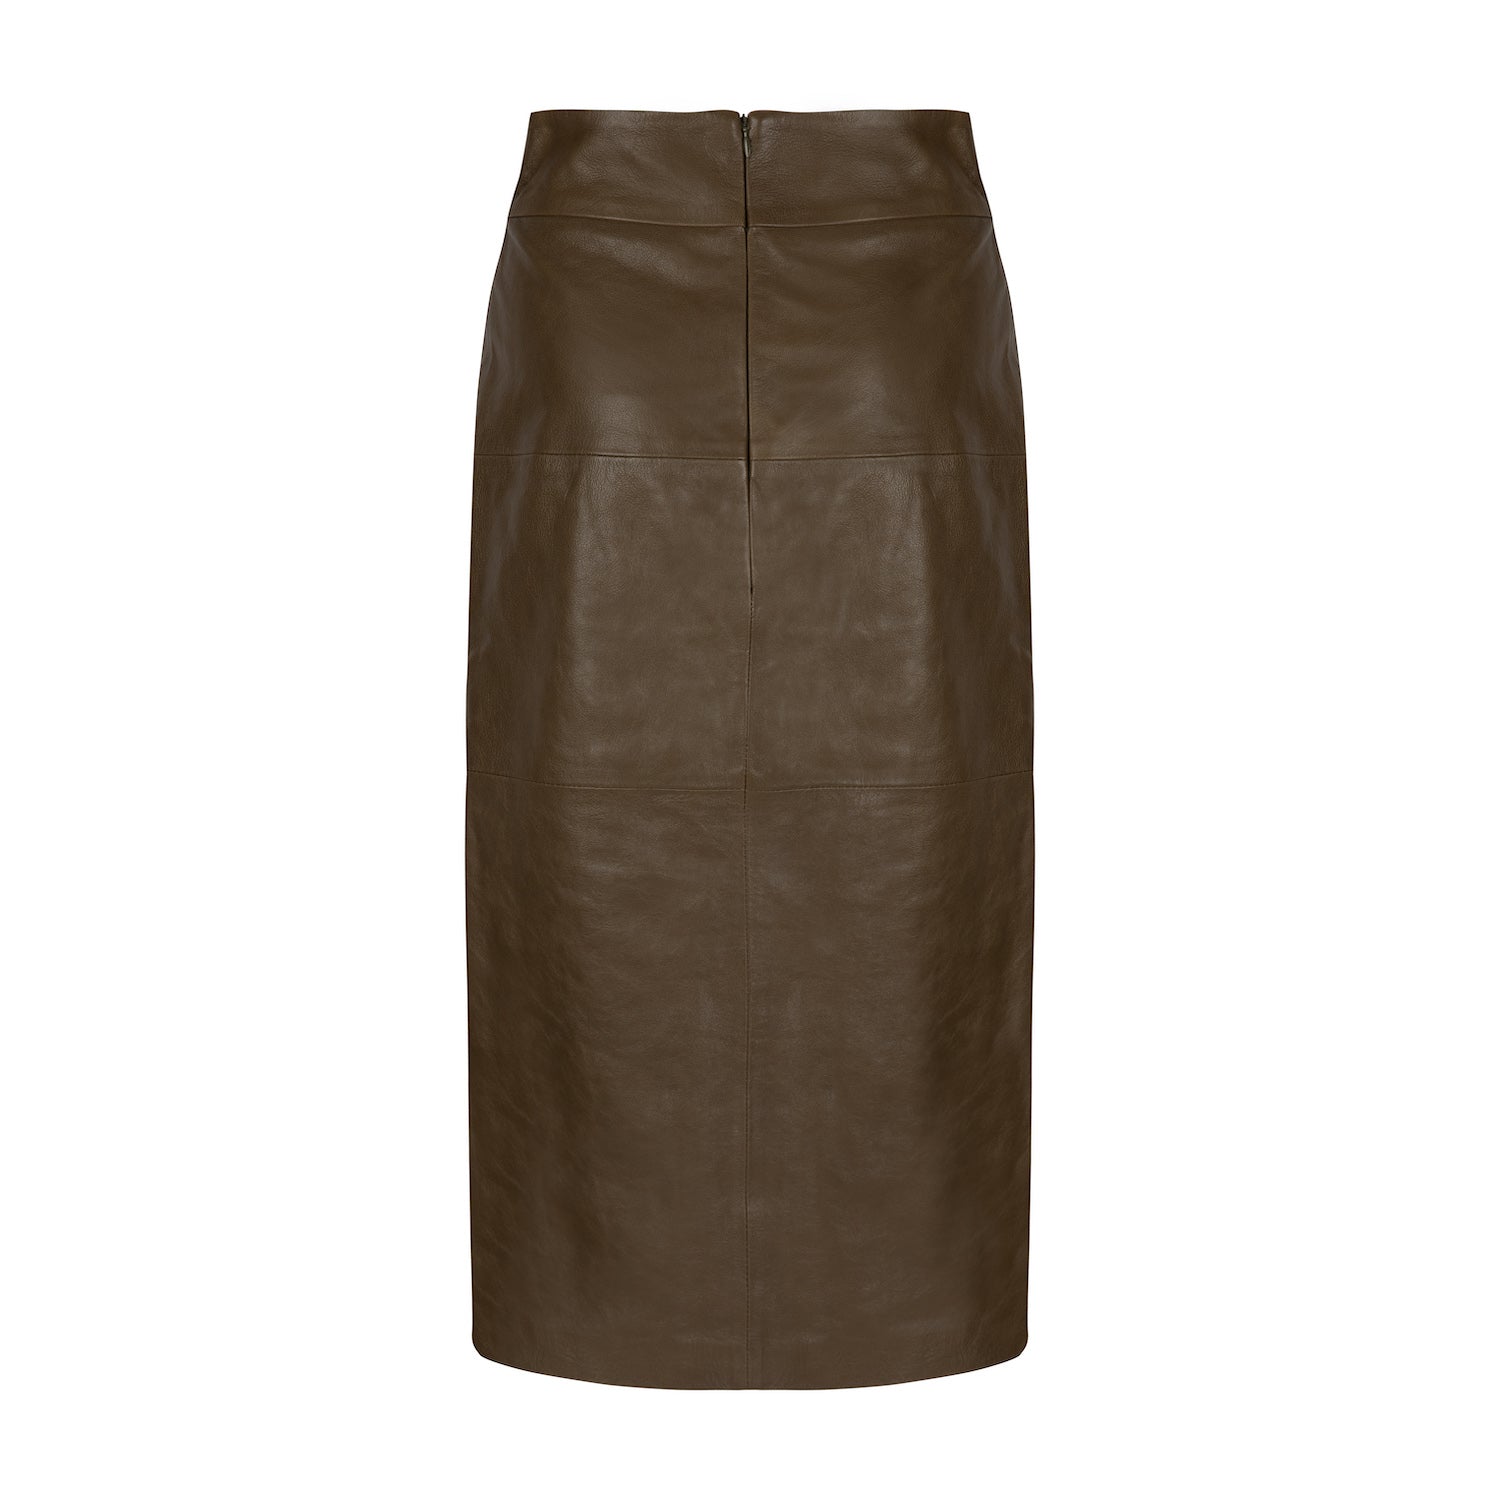 Lucy BUTTON FRONT LEATHER SKIRT - KHAKI